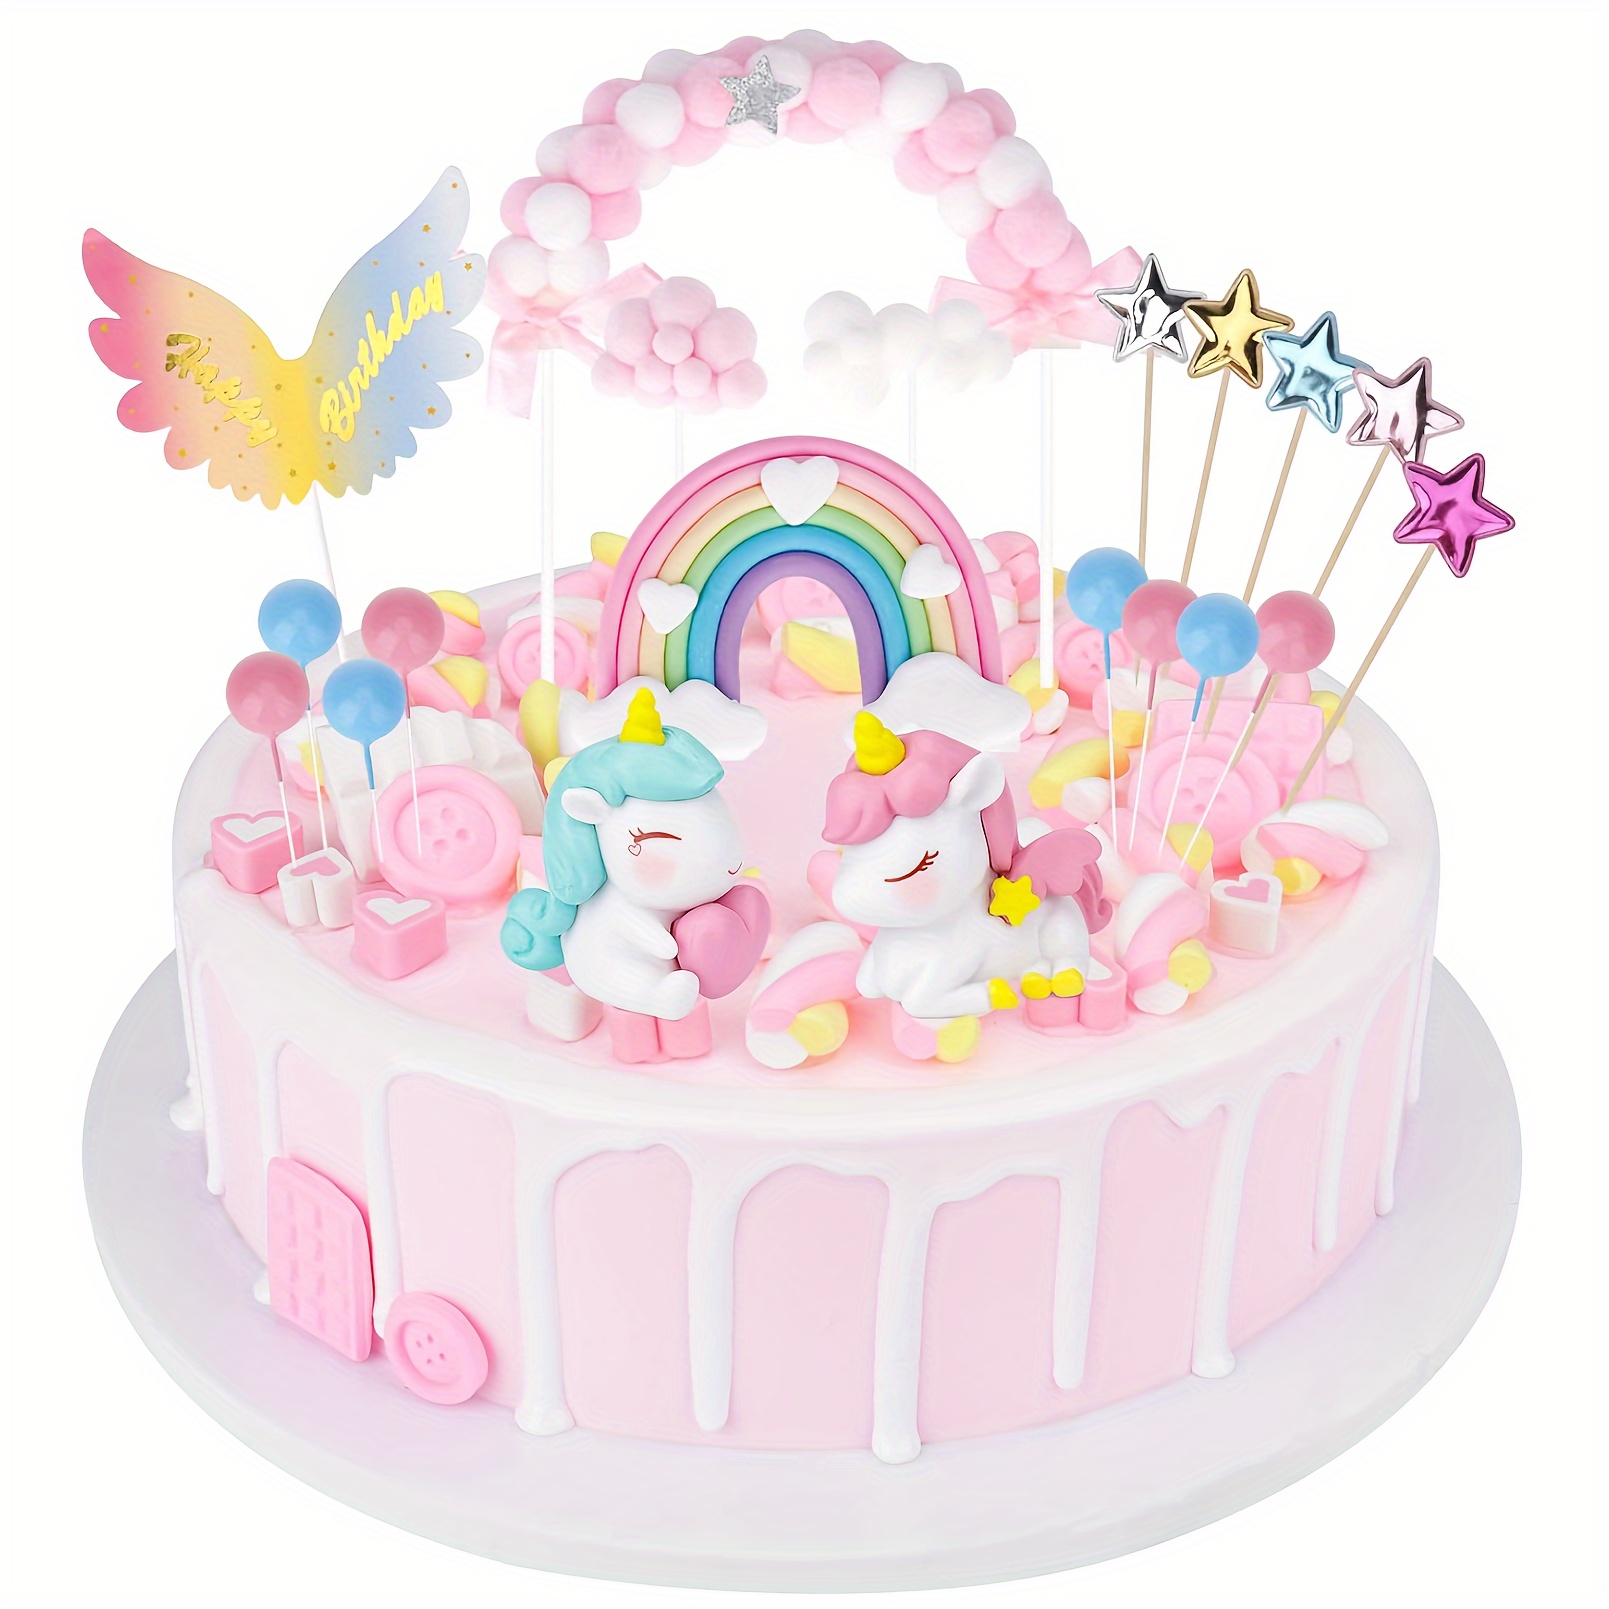 20pcs, Birthday Unicorn Cake Toppers Set, Party Decorations Rainbow Clouds  Cupcake Toppers, Rainbow Toppers For Girl Birthday Party Supplies Anniversa